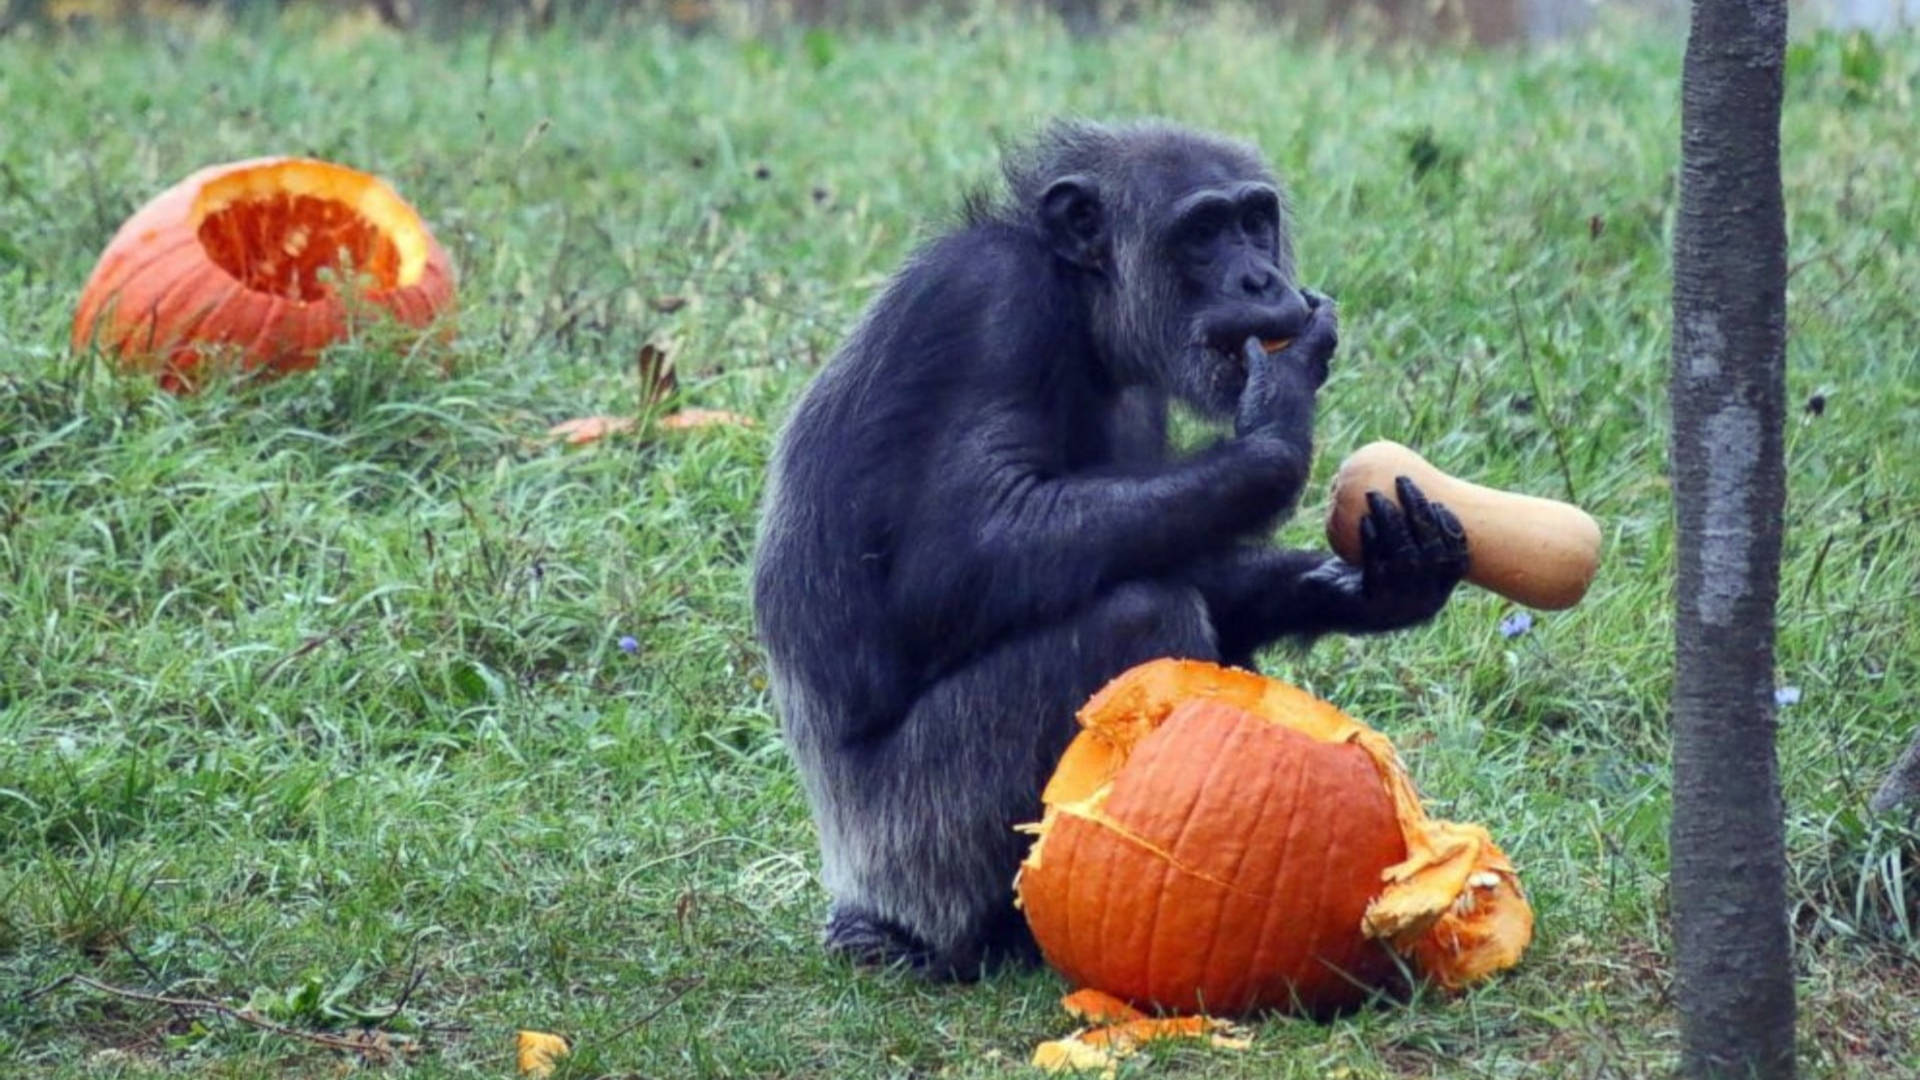 Chimpanzee With Pumpkins In Zoo Wallpaper